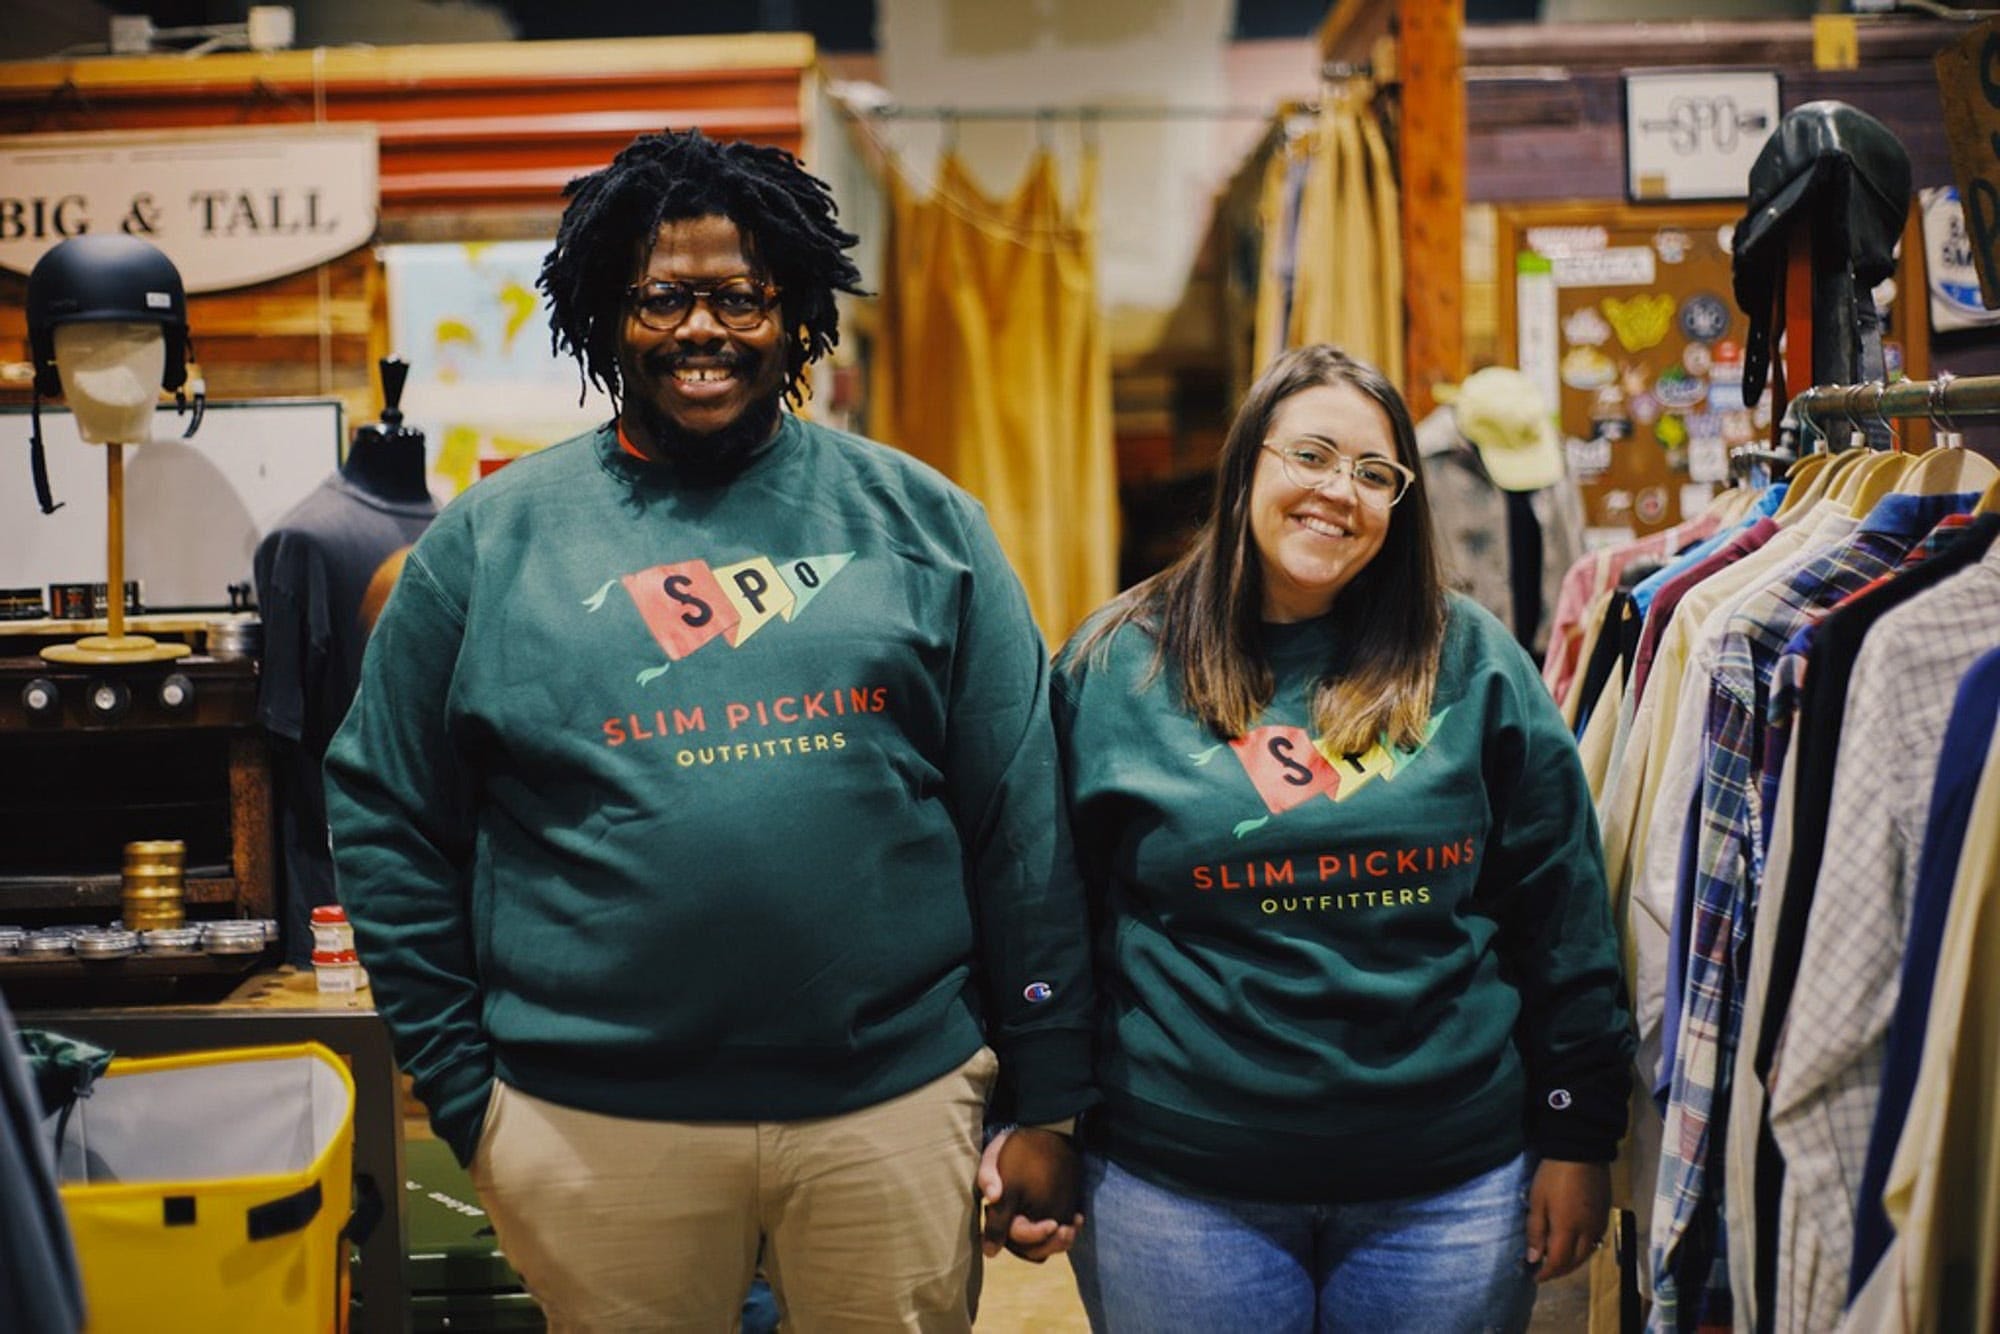 Two figures in matching green Slim Pickins Outfitters sweatshirts, one a Black man with medium-length hair and glasses and the other a white woman with brown hair and glasses, hold hands and face the camera in a three-quarter-length portrait taken inside an outdoor-gear store